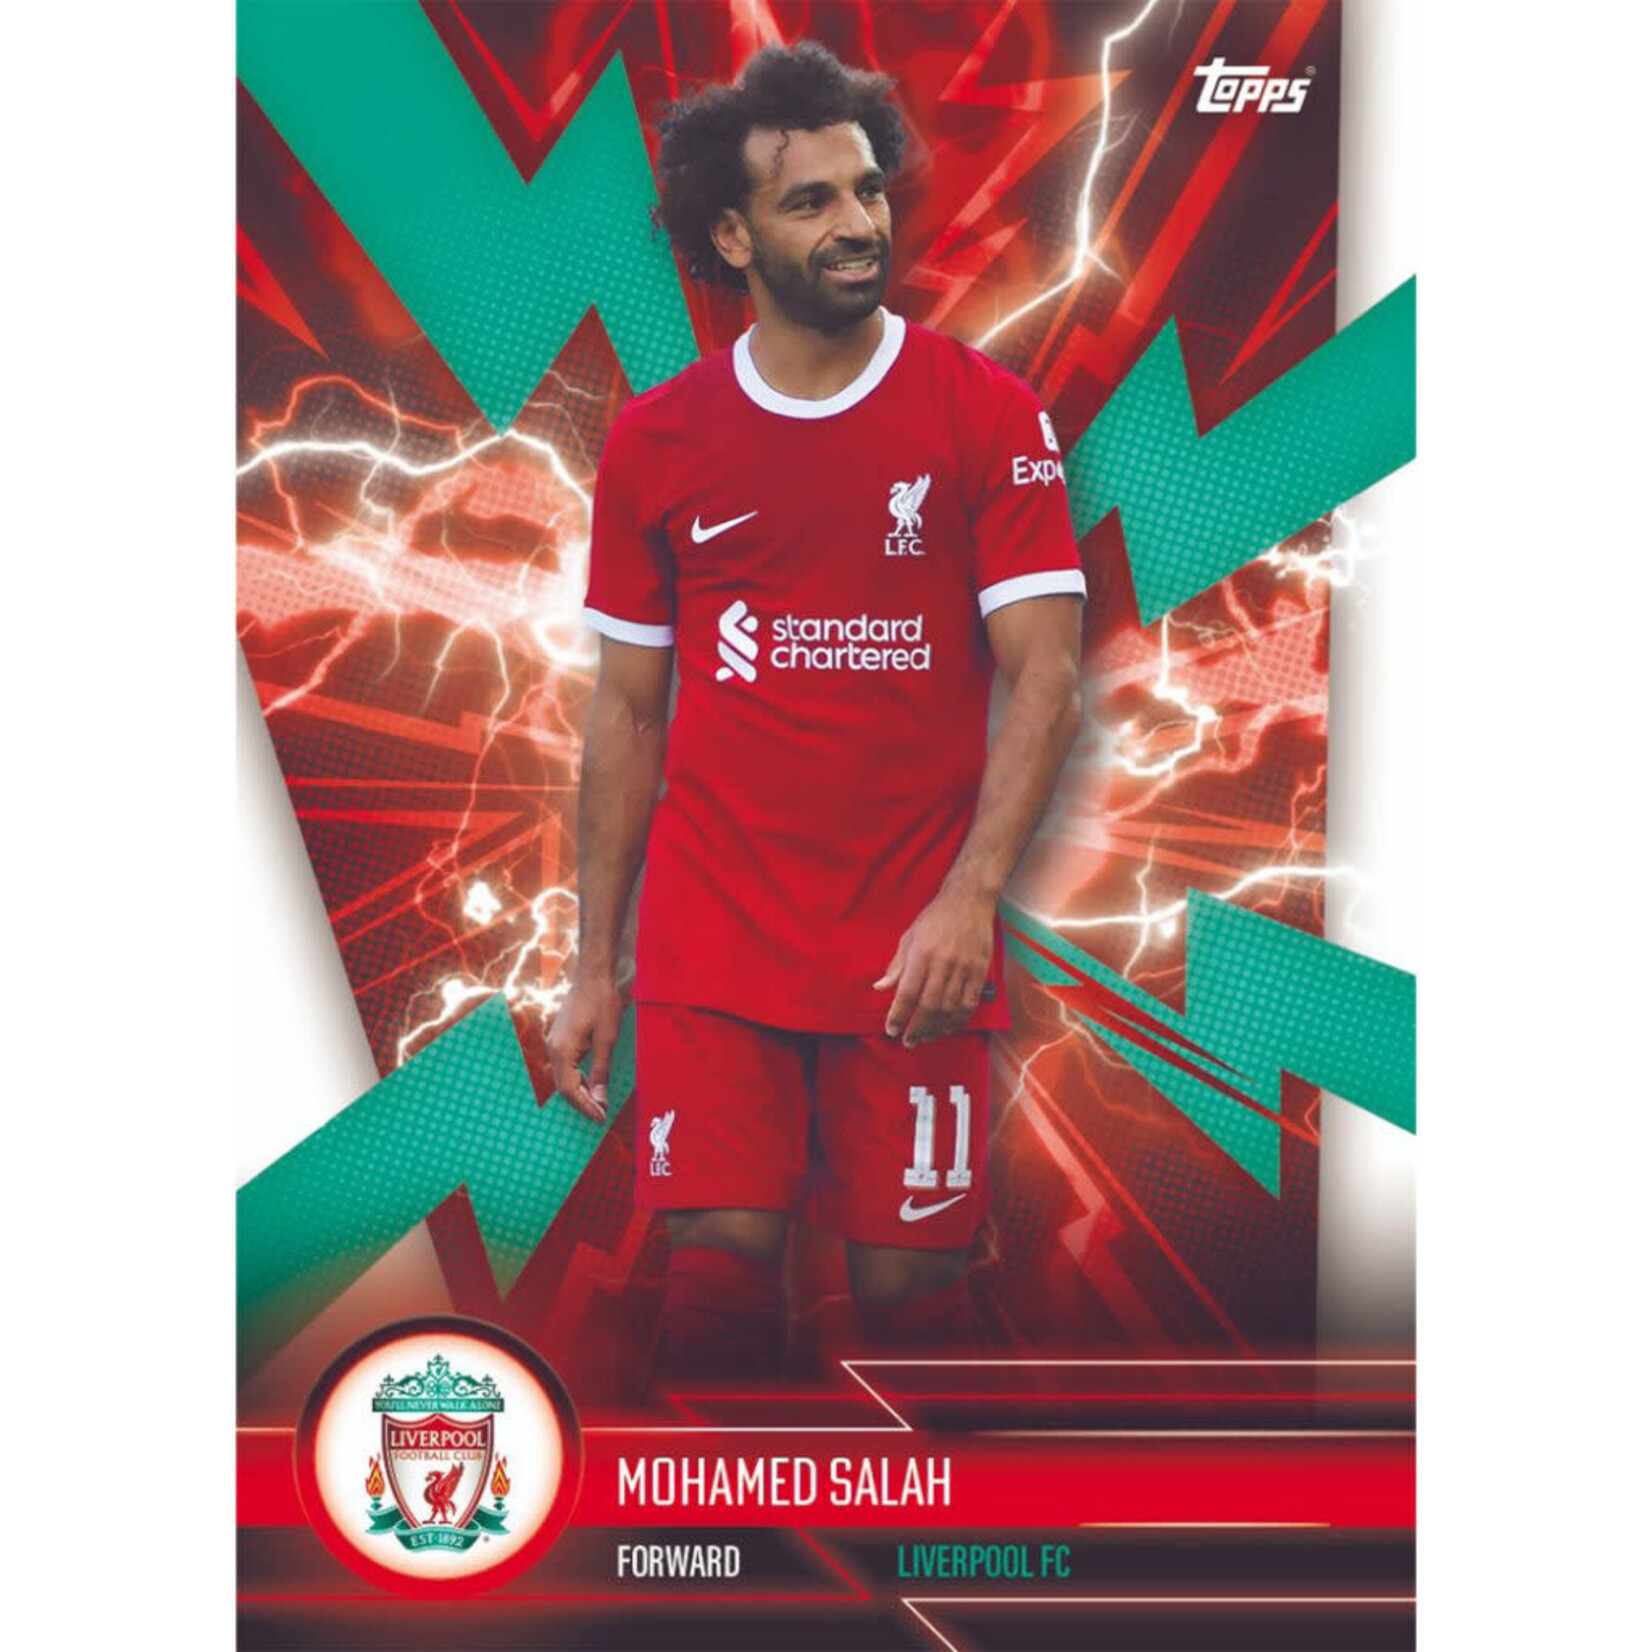 Topps 2023-24 TOPPS LIVERPOOL FAN SET (28 CARDS)